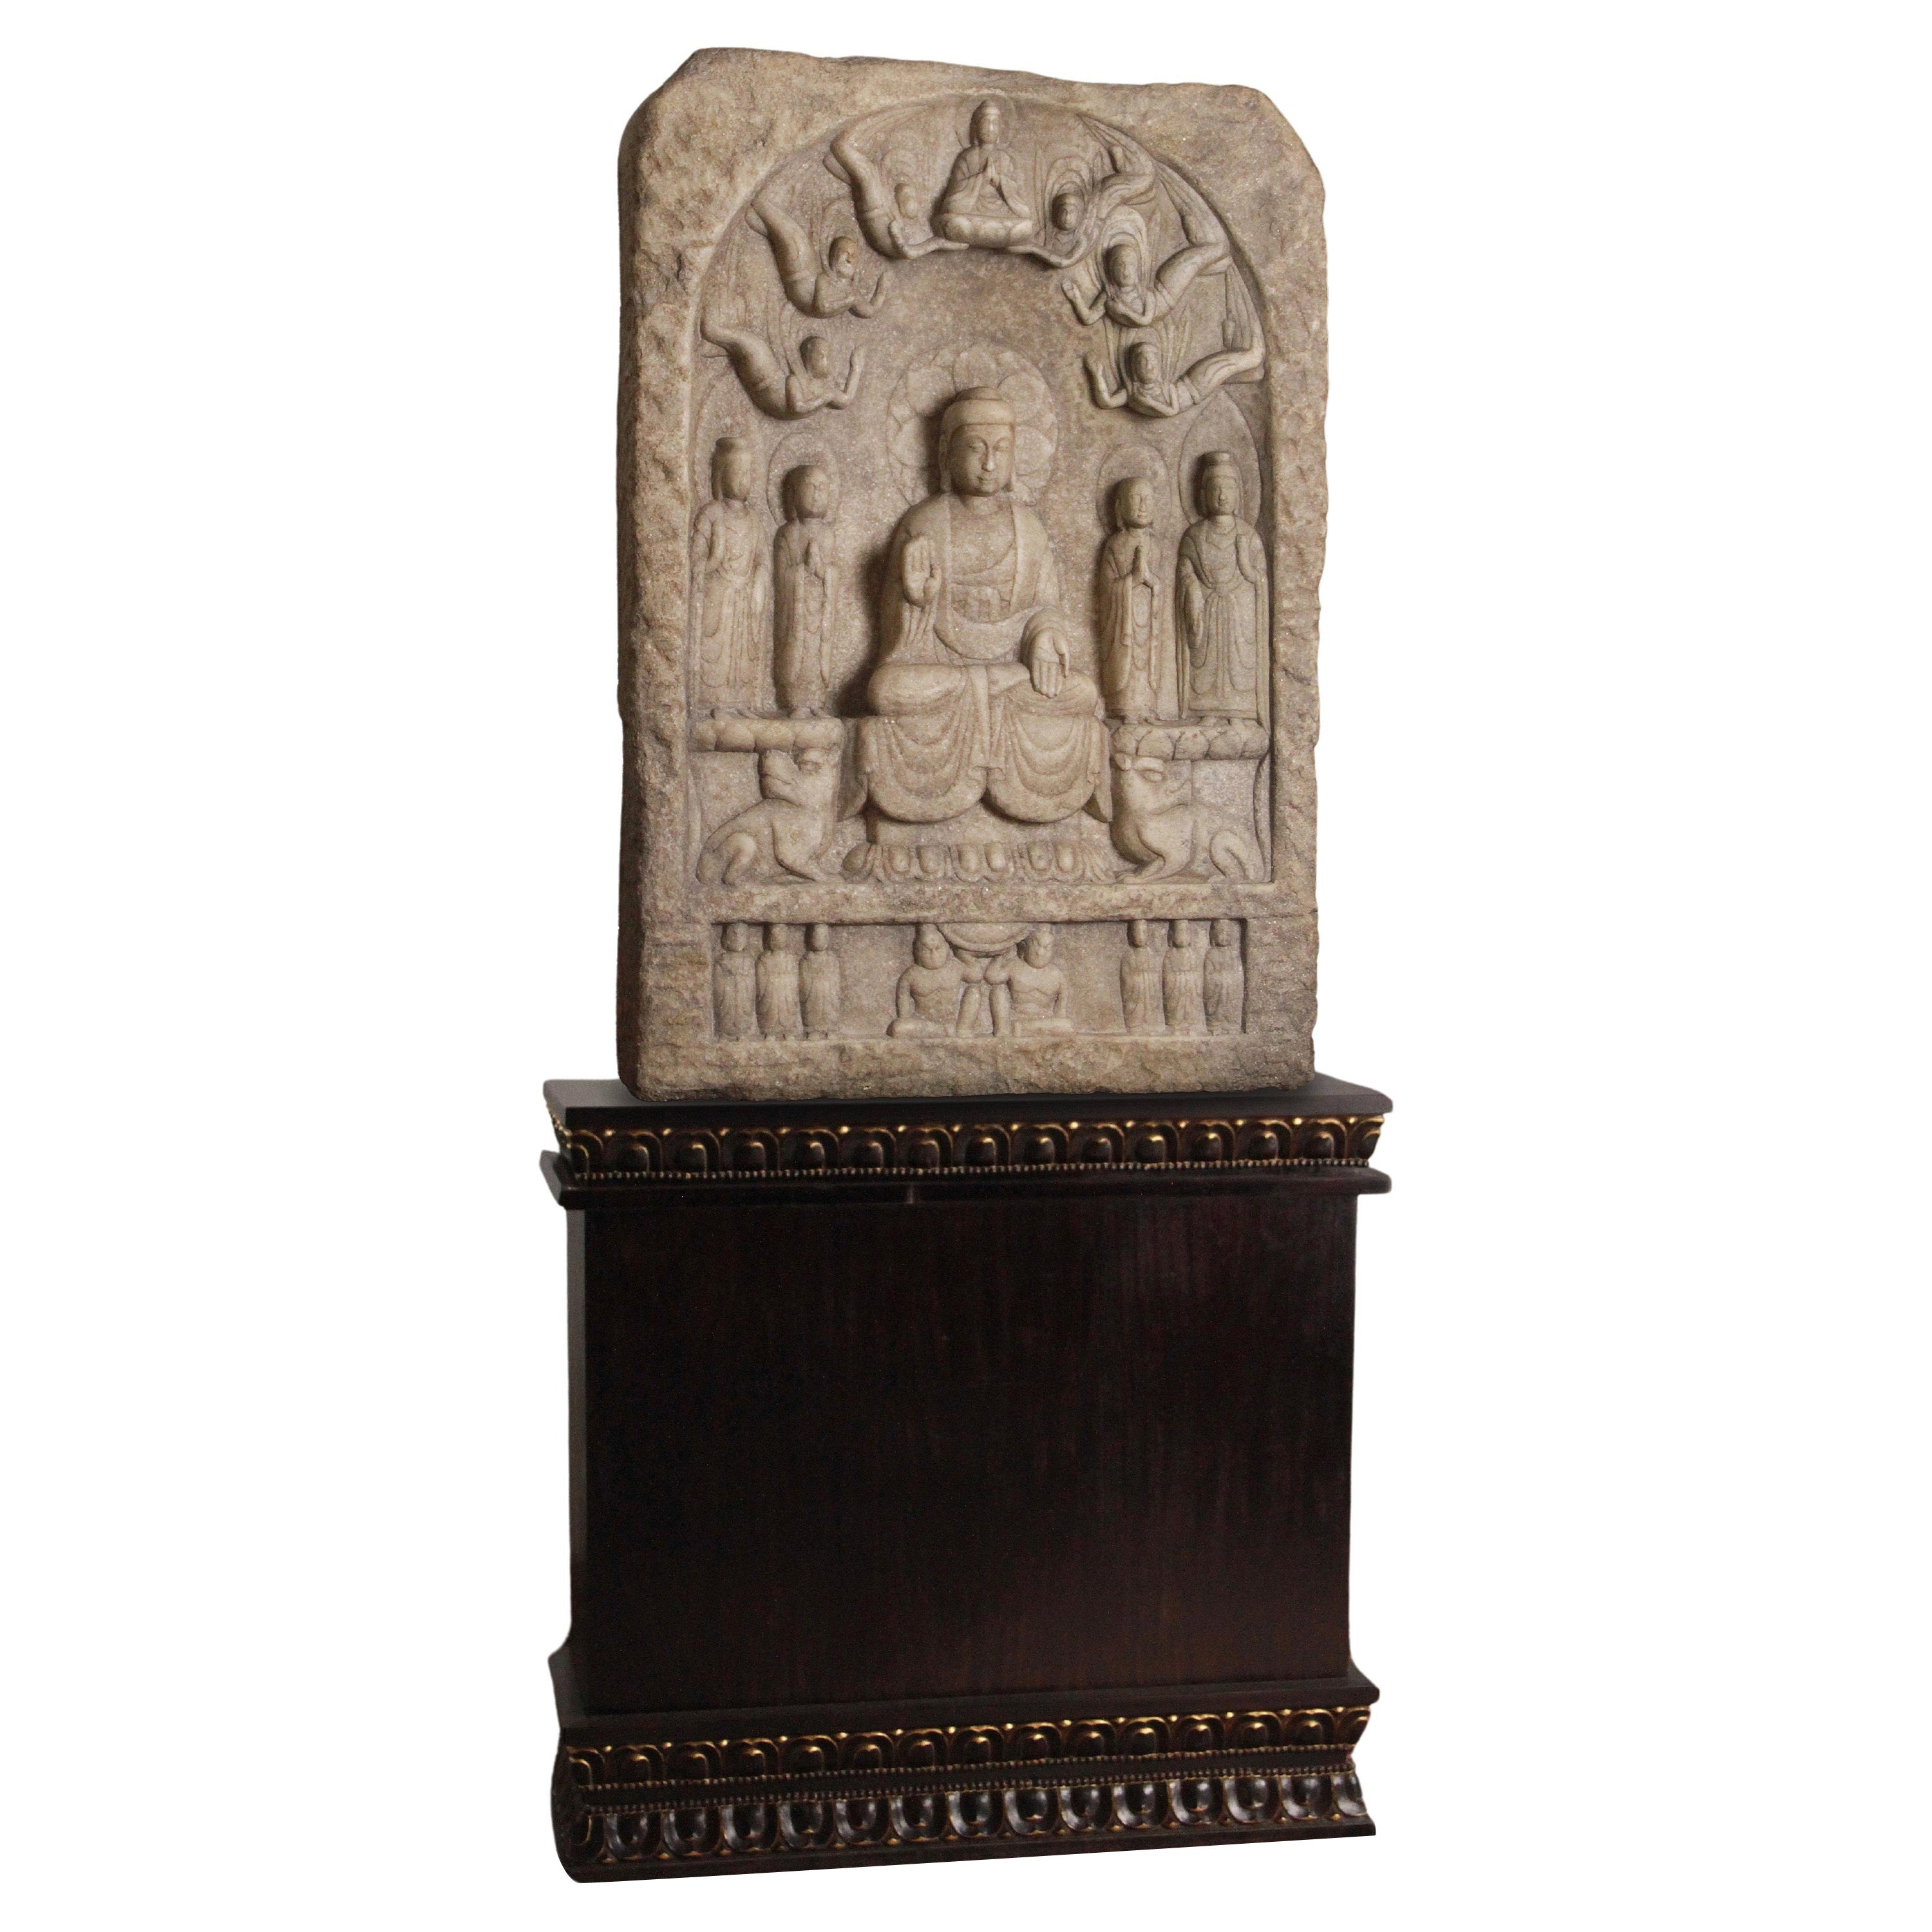 Hand-Carved Asian Art and Furniture